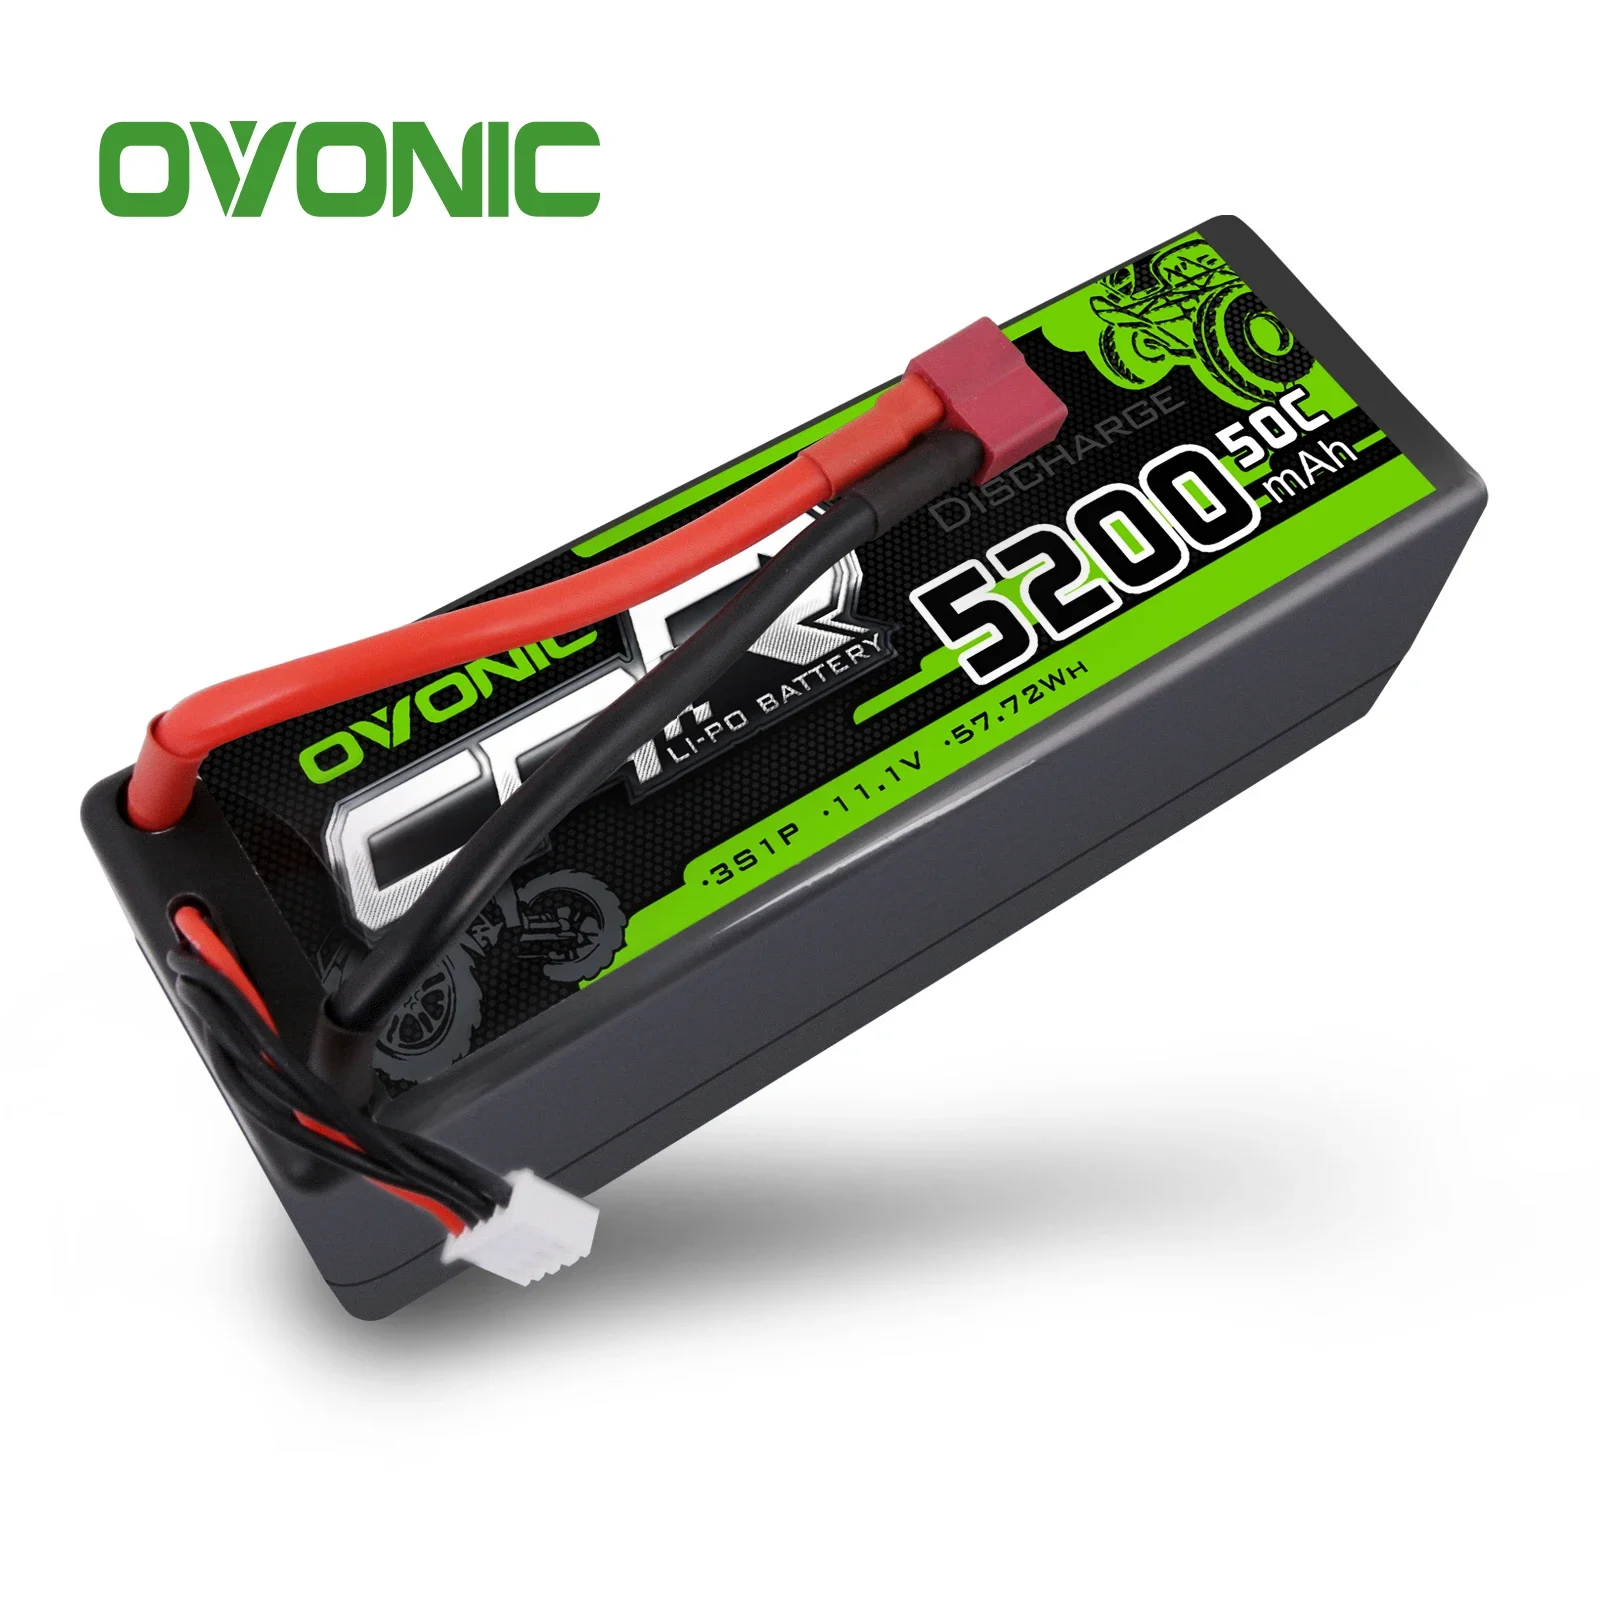 

Ovonic 5200mAh RC Lipo Battery 11.1V 50C 3S RC Battery with Deans Plug for RC Evader Boat Car Truck Truggy Buggy Tank Helicopter